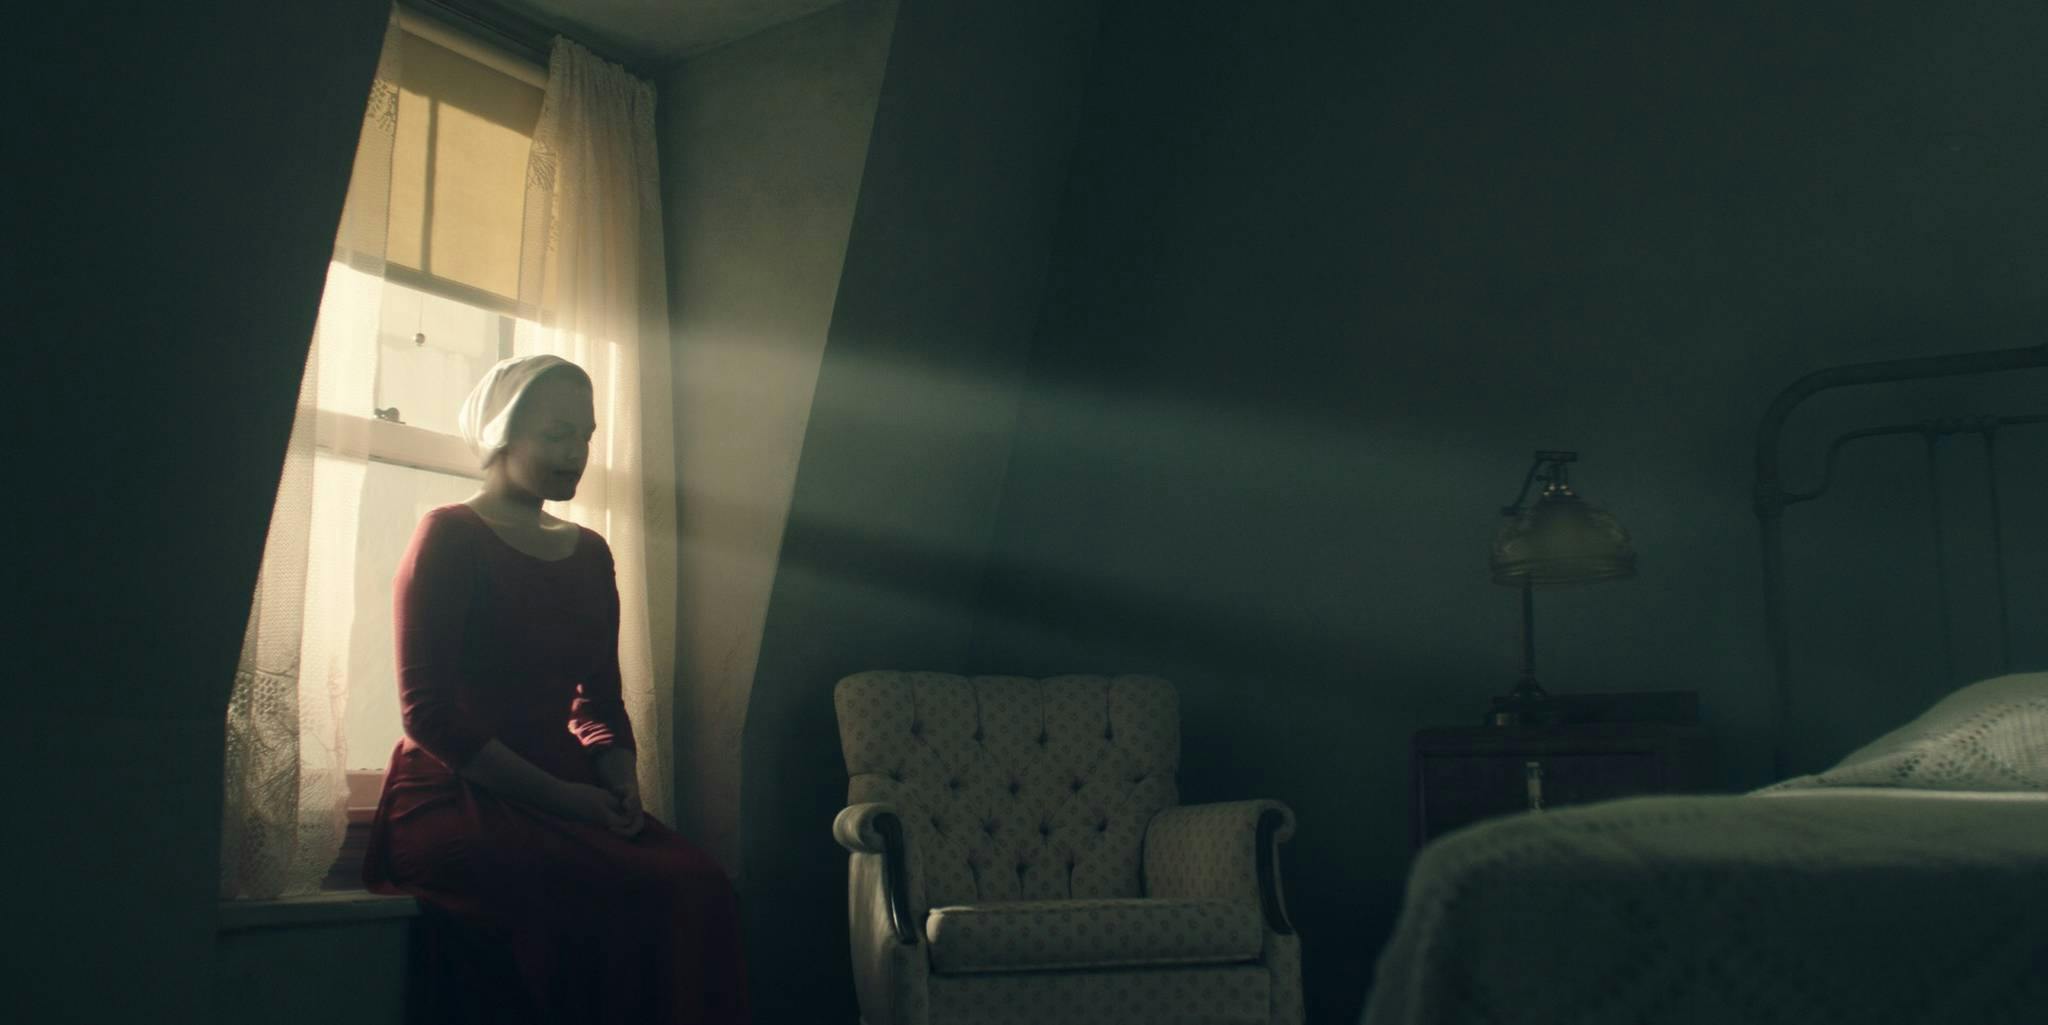 Best new shows 2017: The Handmaid's Tale